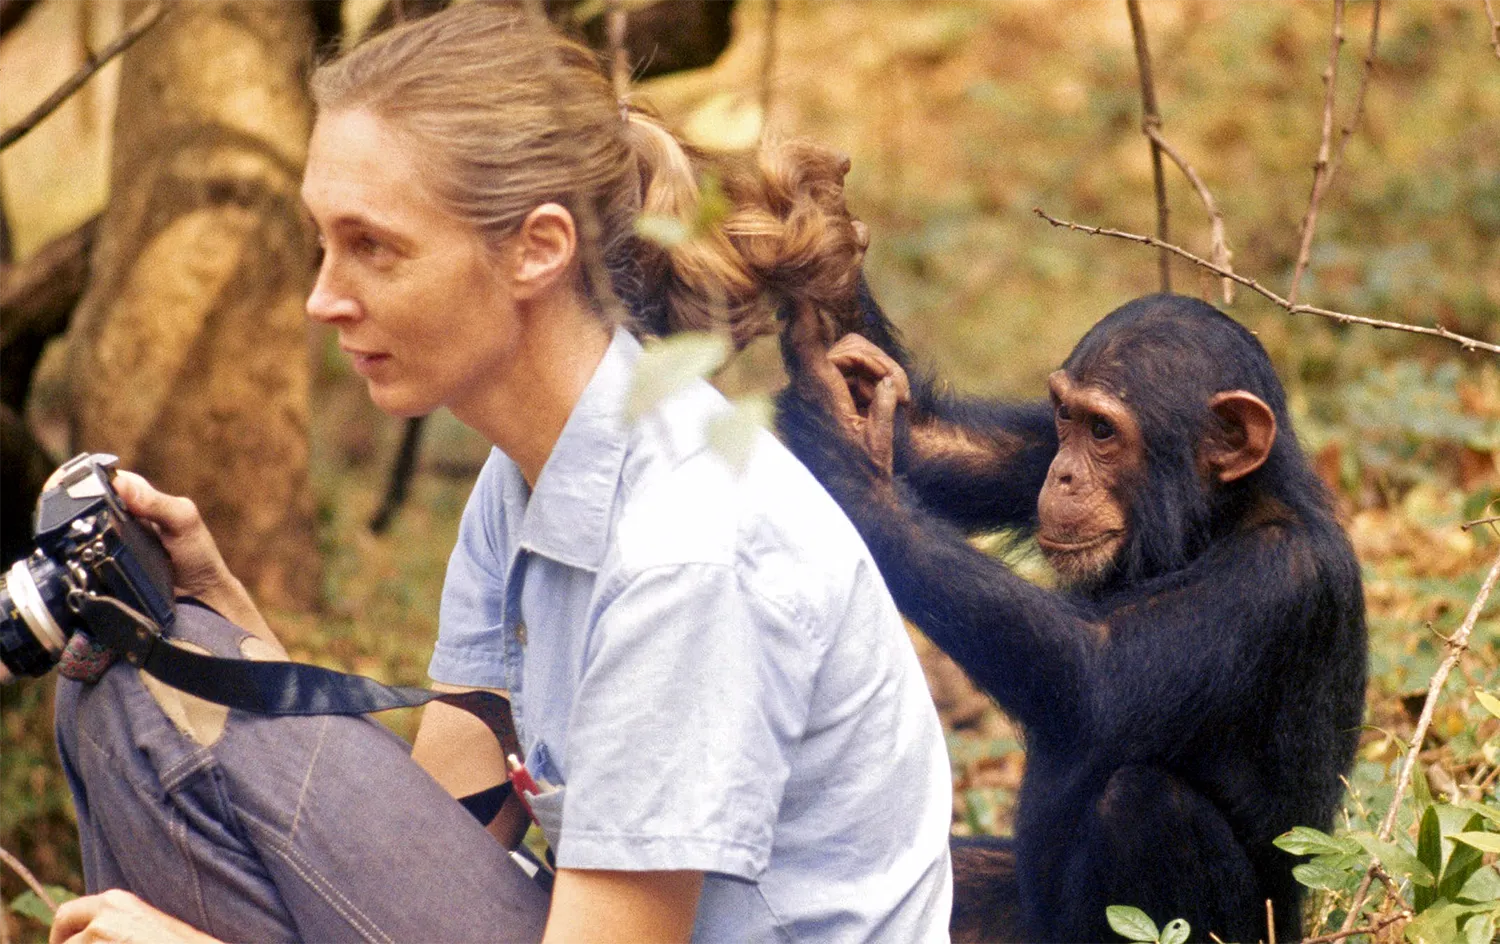 A little chimpanzee plays with Jane Goodall’s hair.